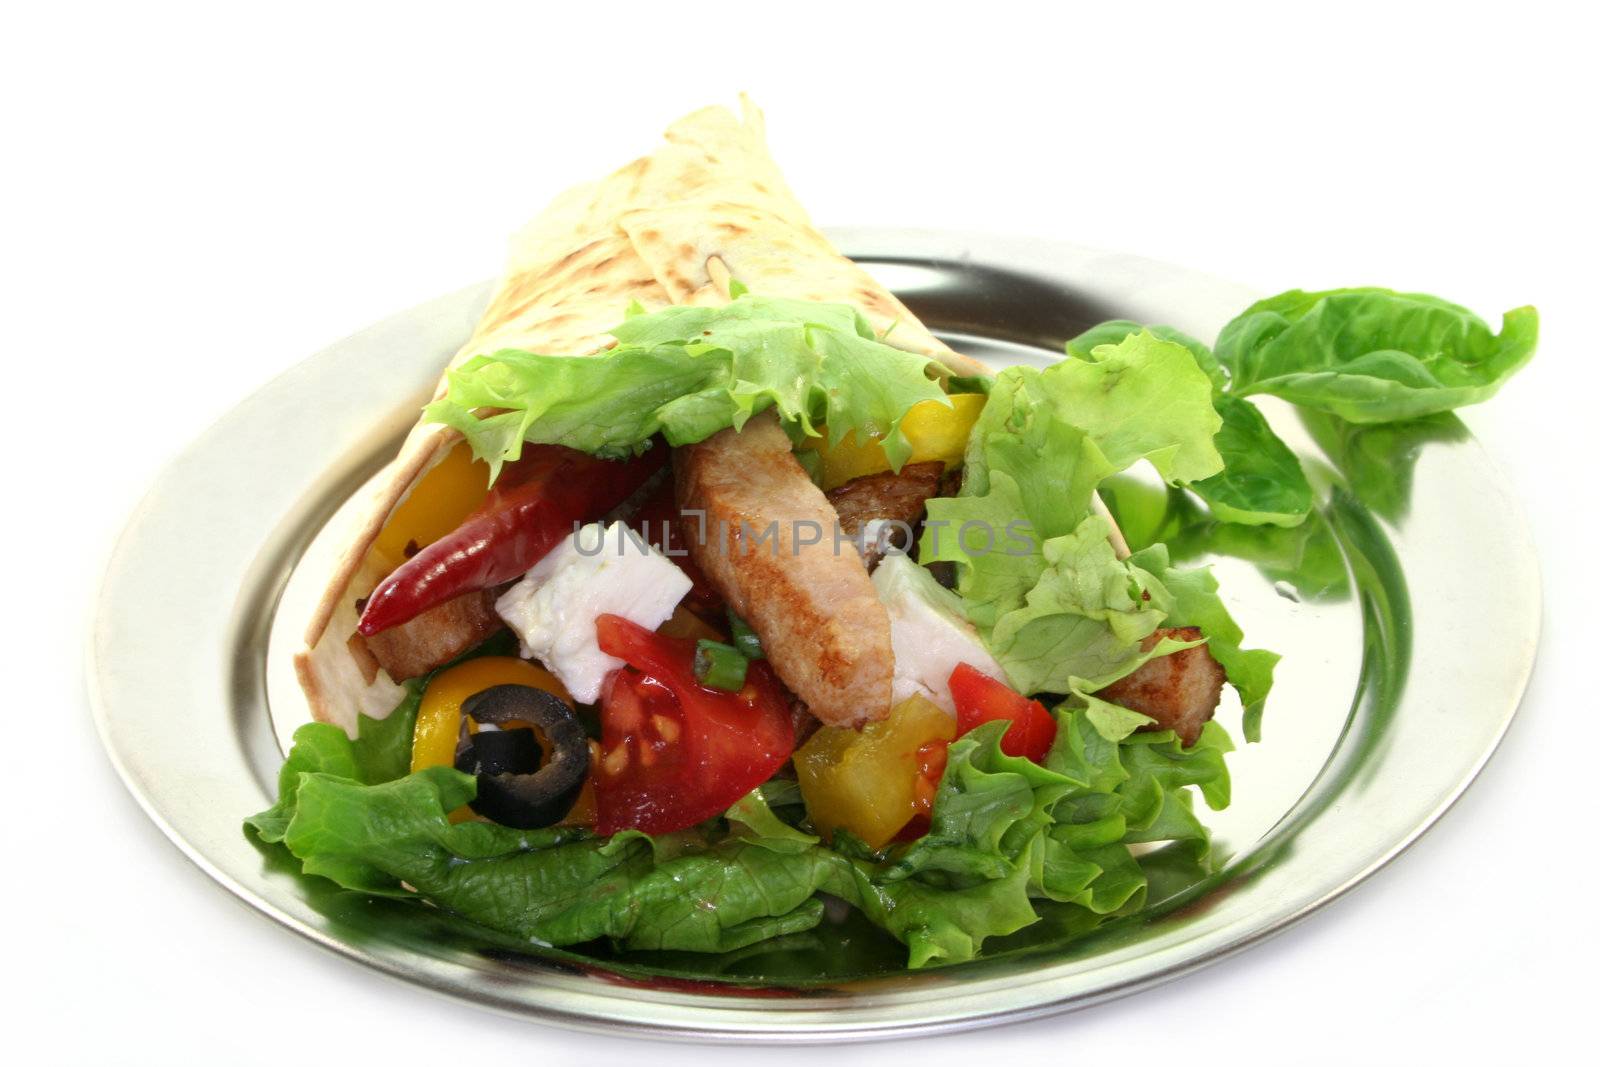 Tortilla filled with cheese, turkey breast and vegetables